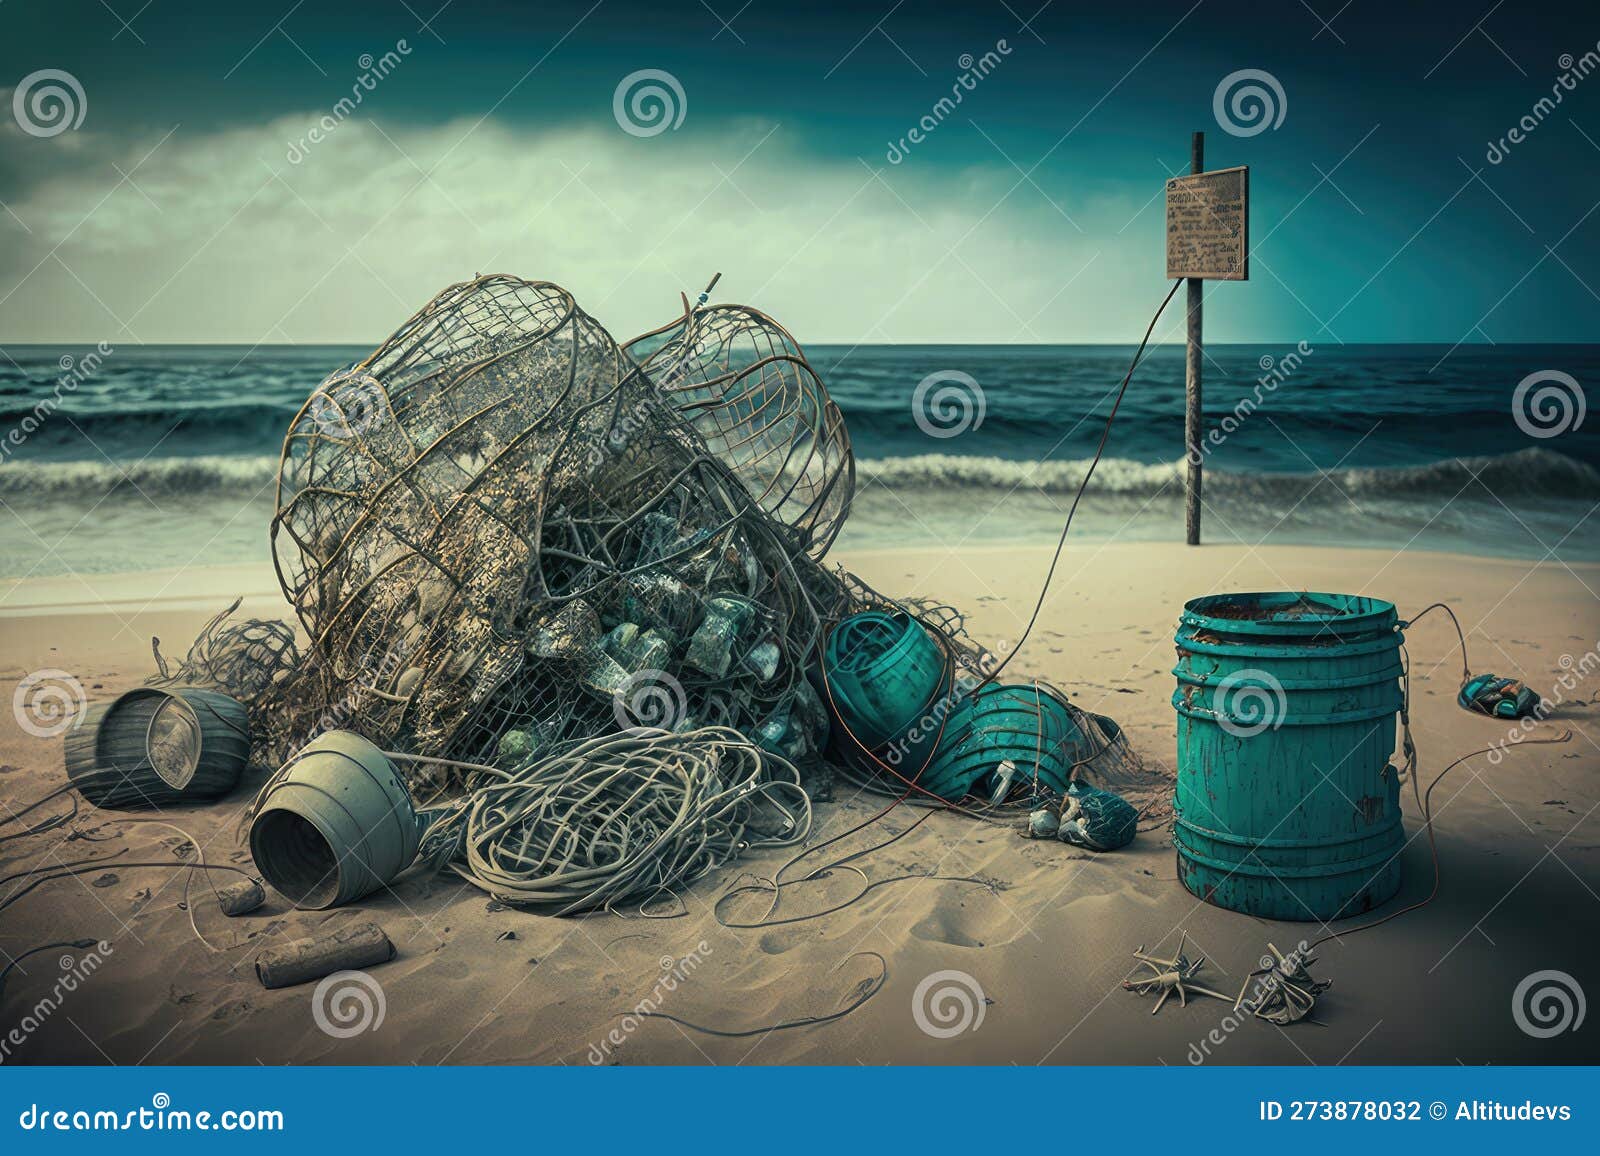 Beach with Piles of Discarded Fishing Gear, Nets, and Traps on the Sand  Stock Illustration - Illustration of fish, seafood: 273878032